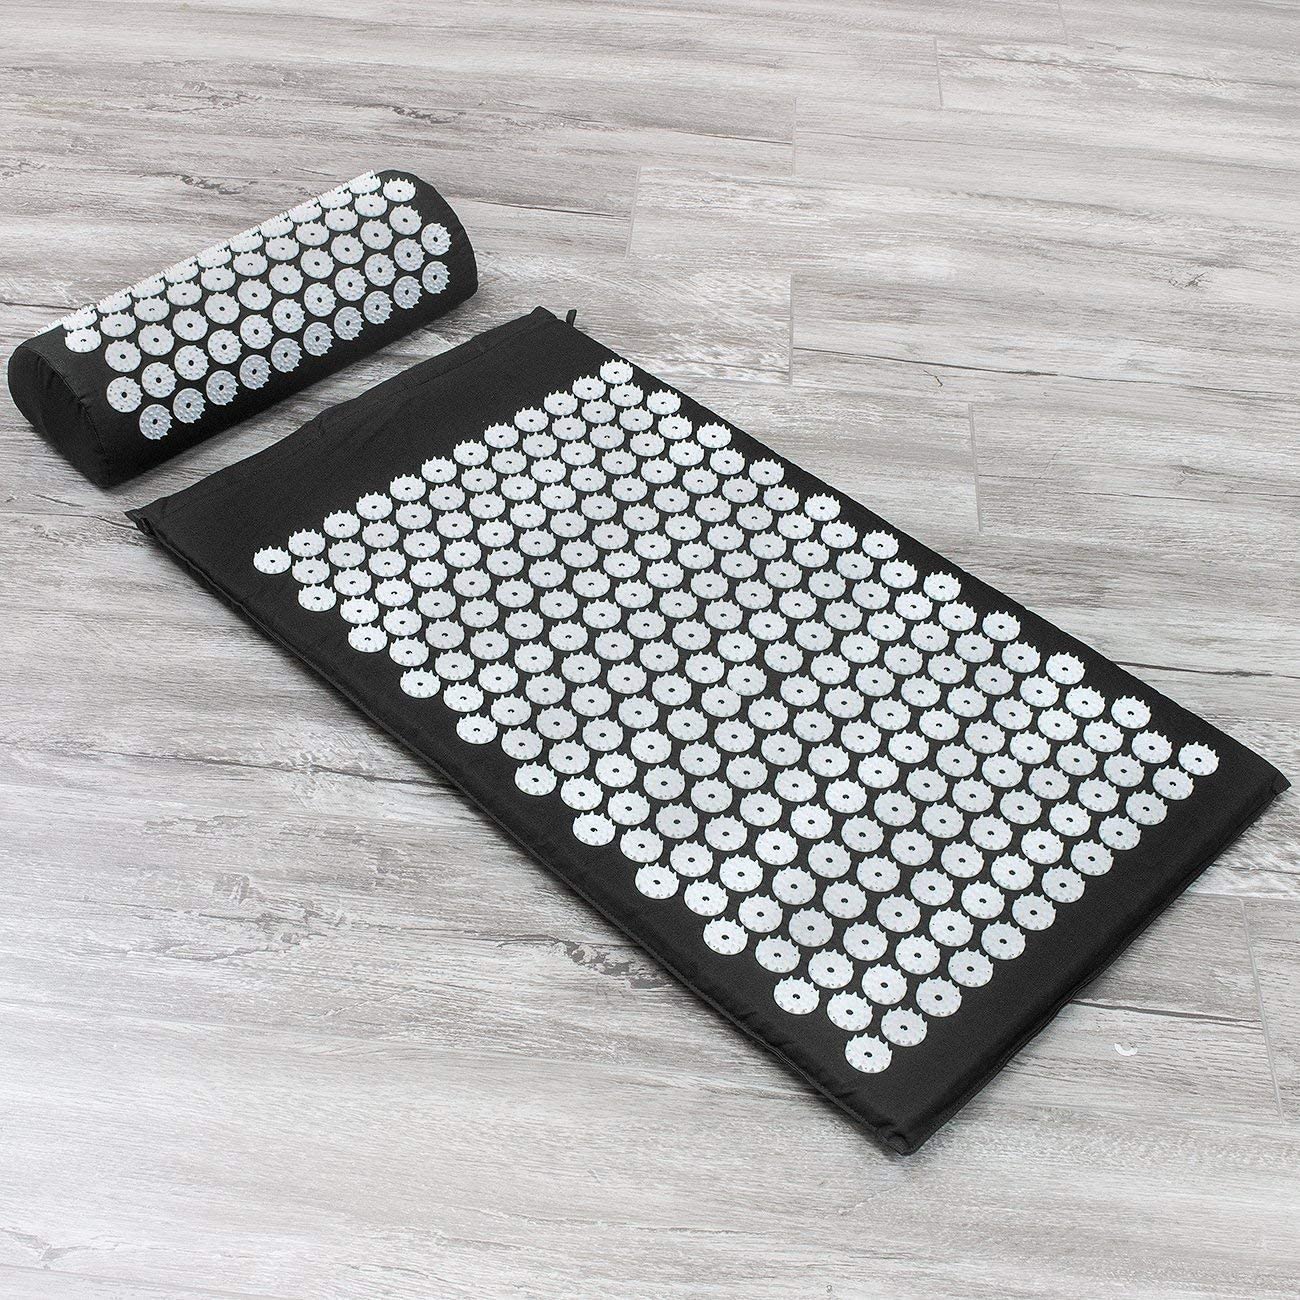 Sivan Health And Fitness Deluxe Acupressure Mat & Pillow Combo Set, Green - image 2 of 7